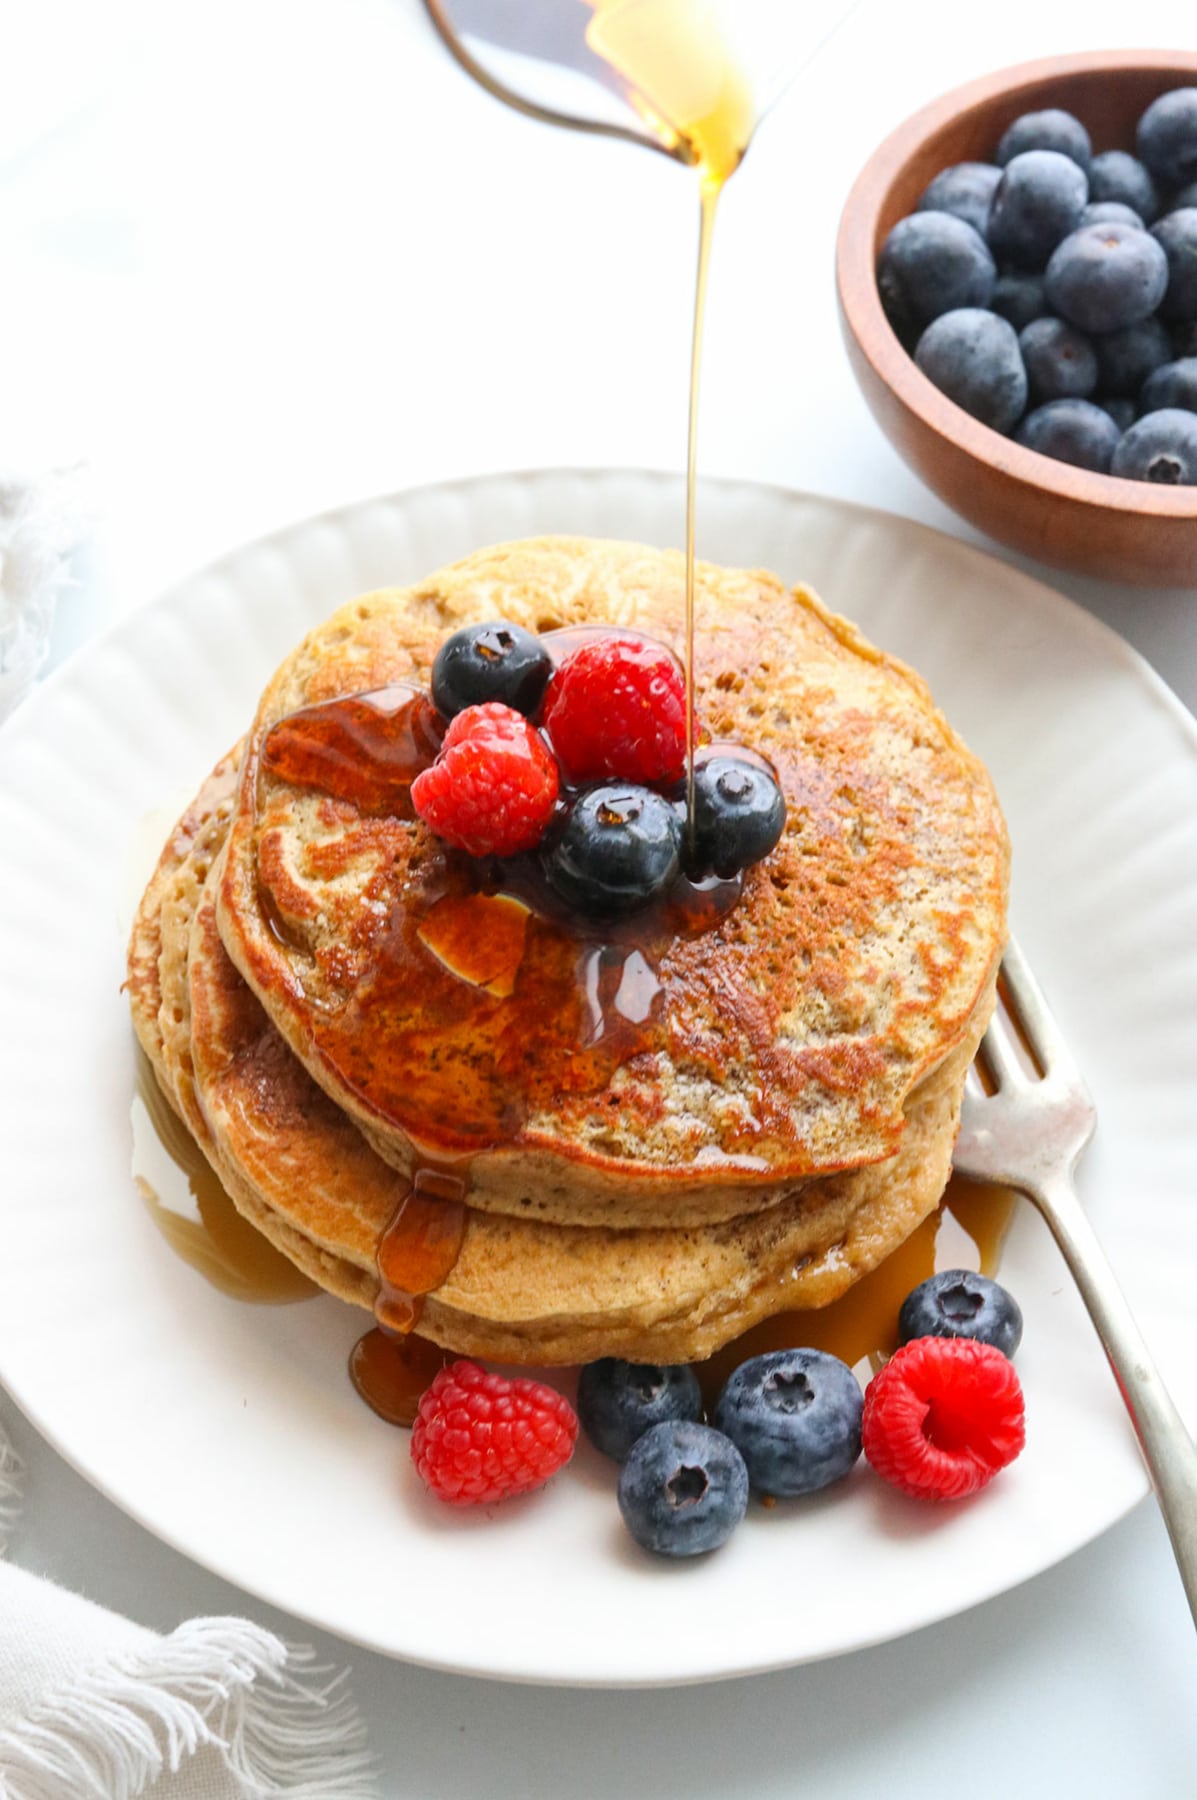 protein pancakes topped with berries and maple syrup drizzled on top.